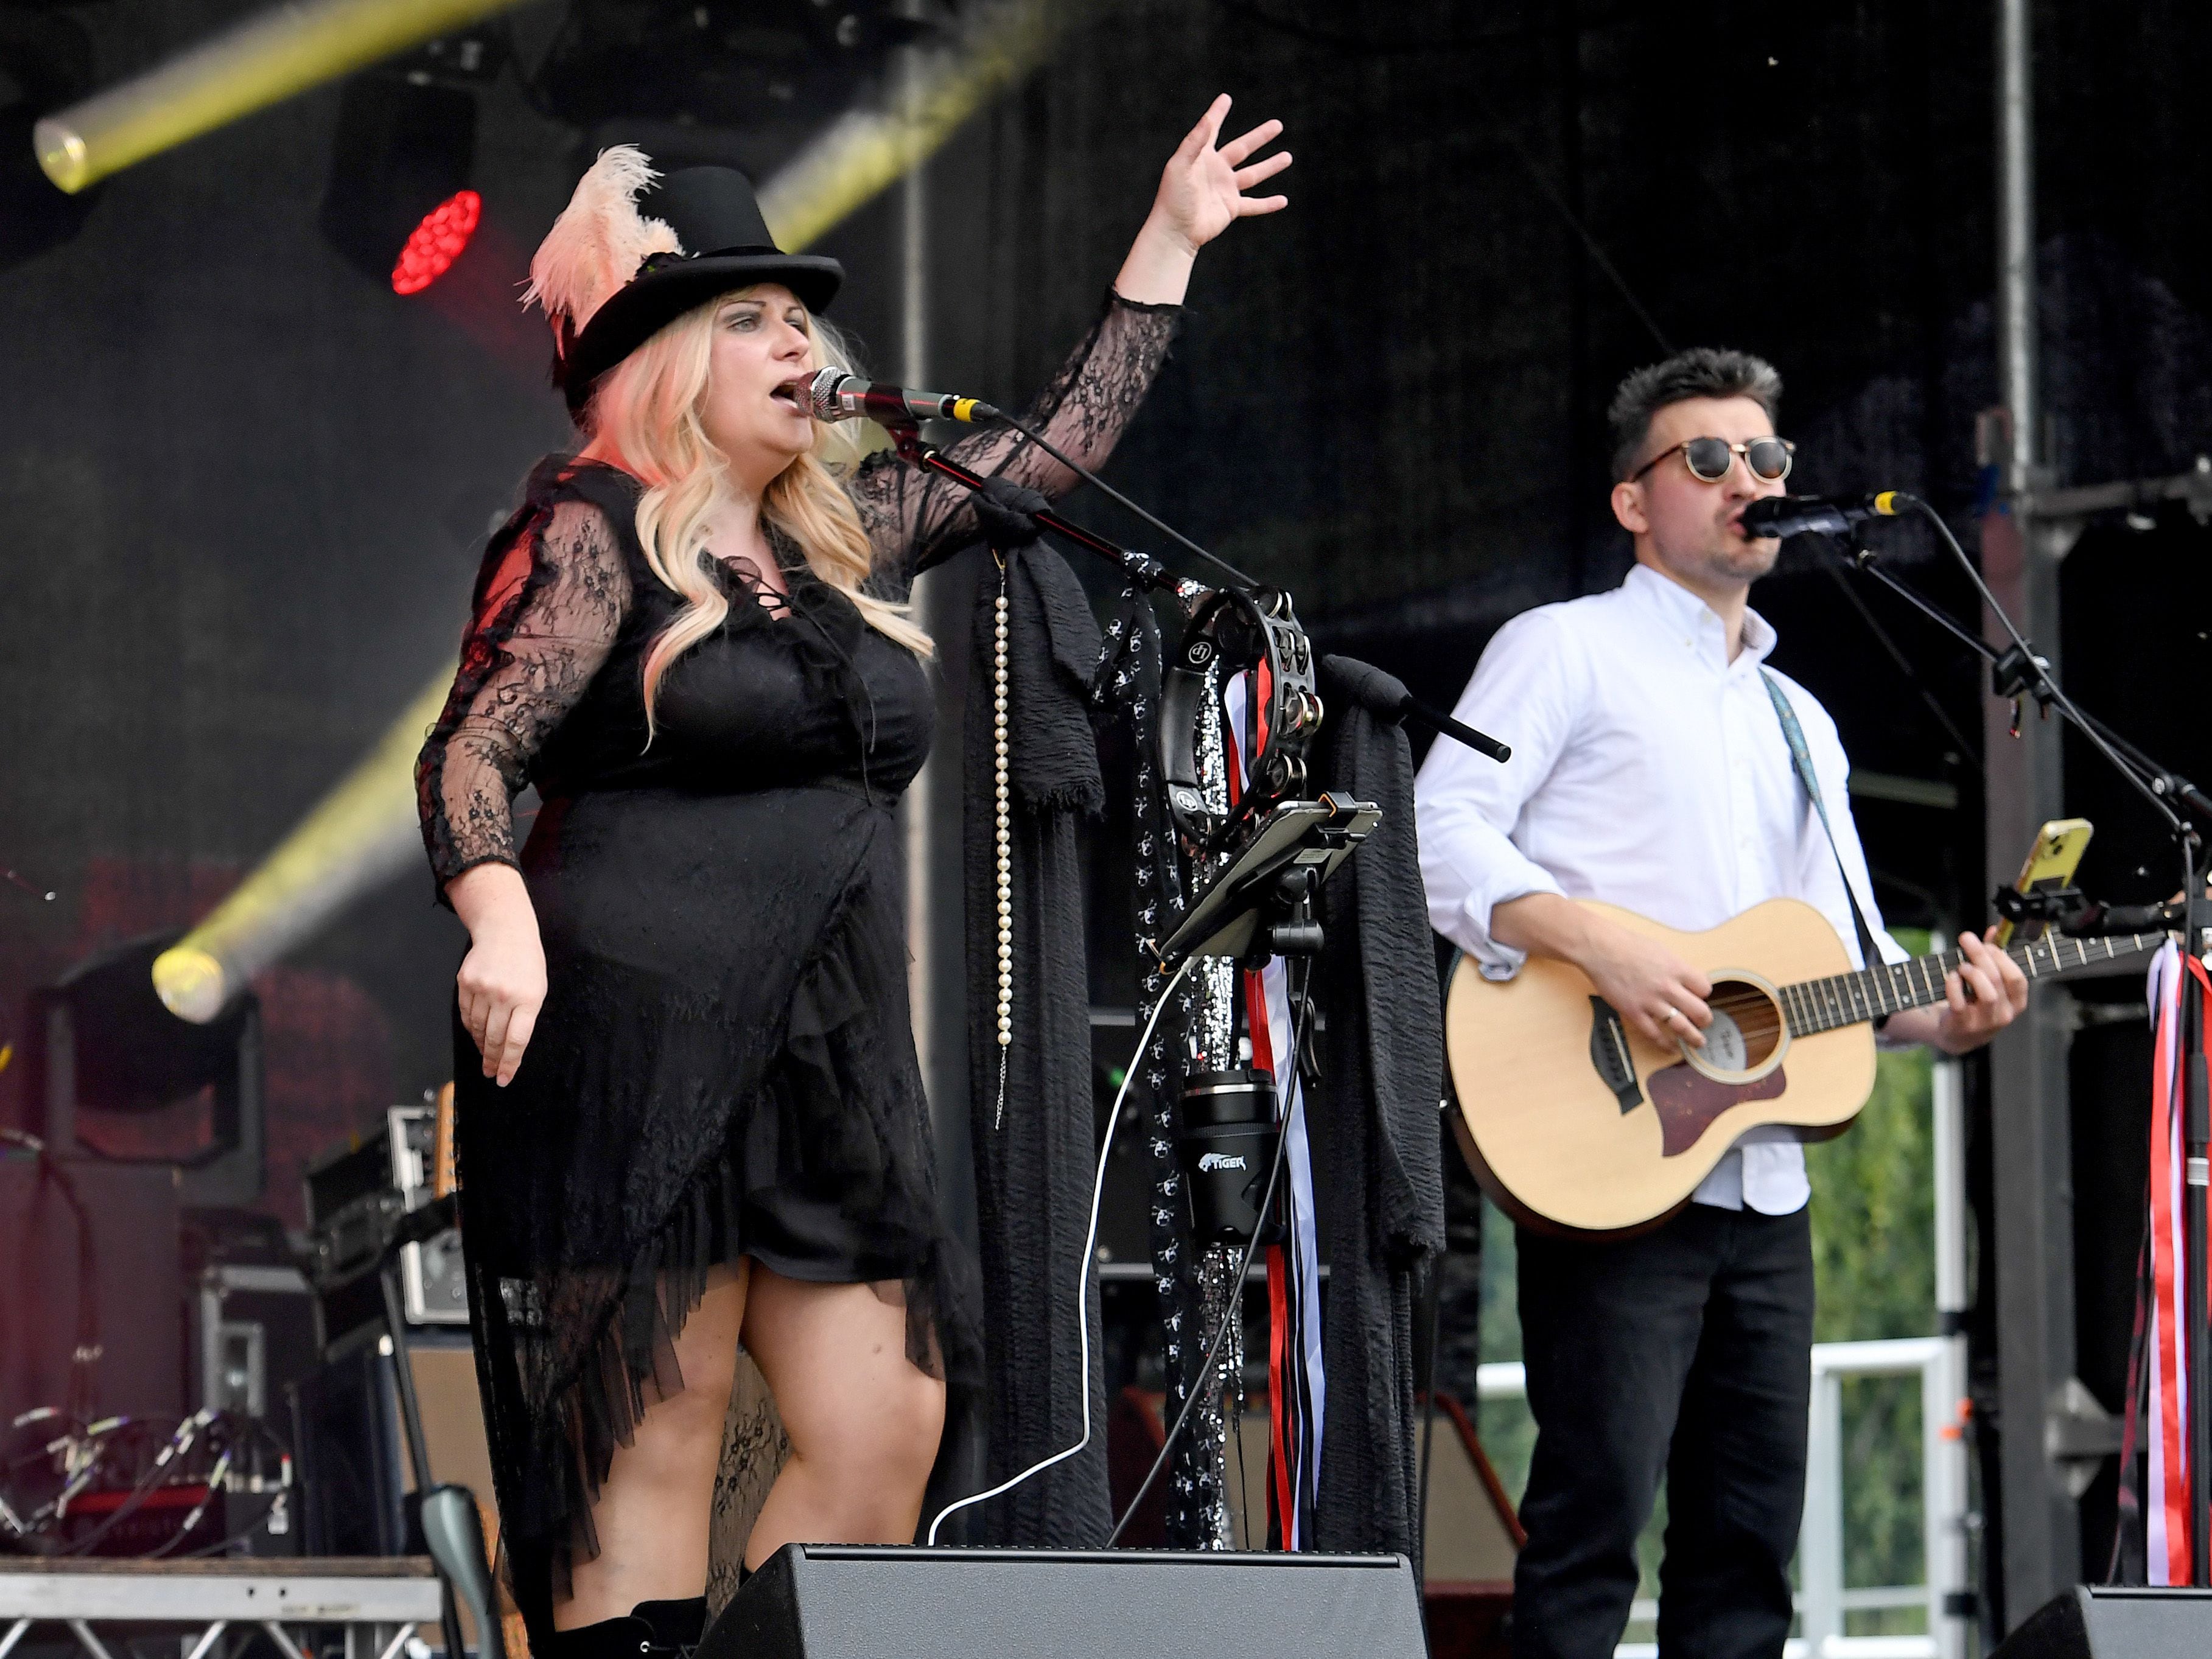 Watch: Michael Buble and Fleetwood Mac hits belted out at Black Country music festival